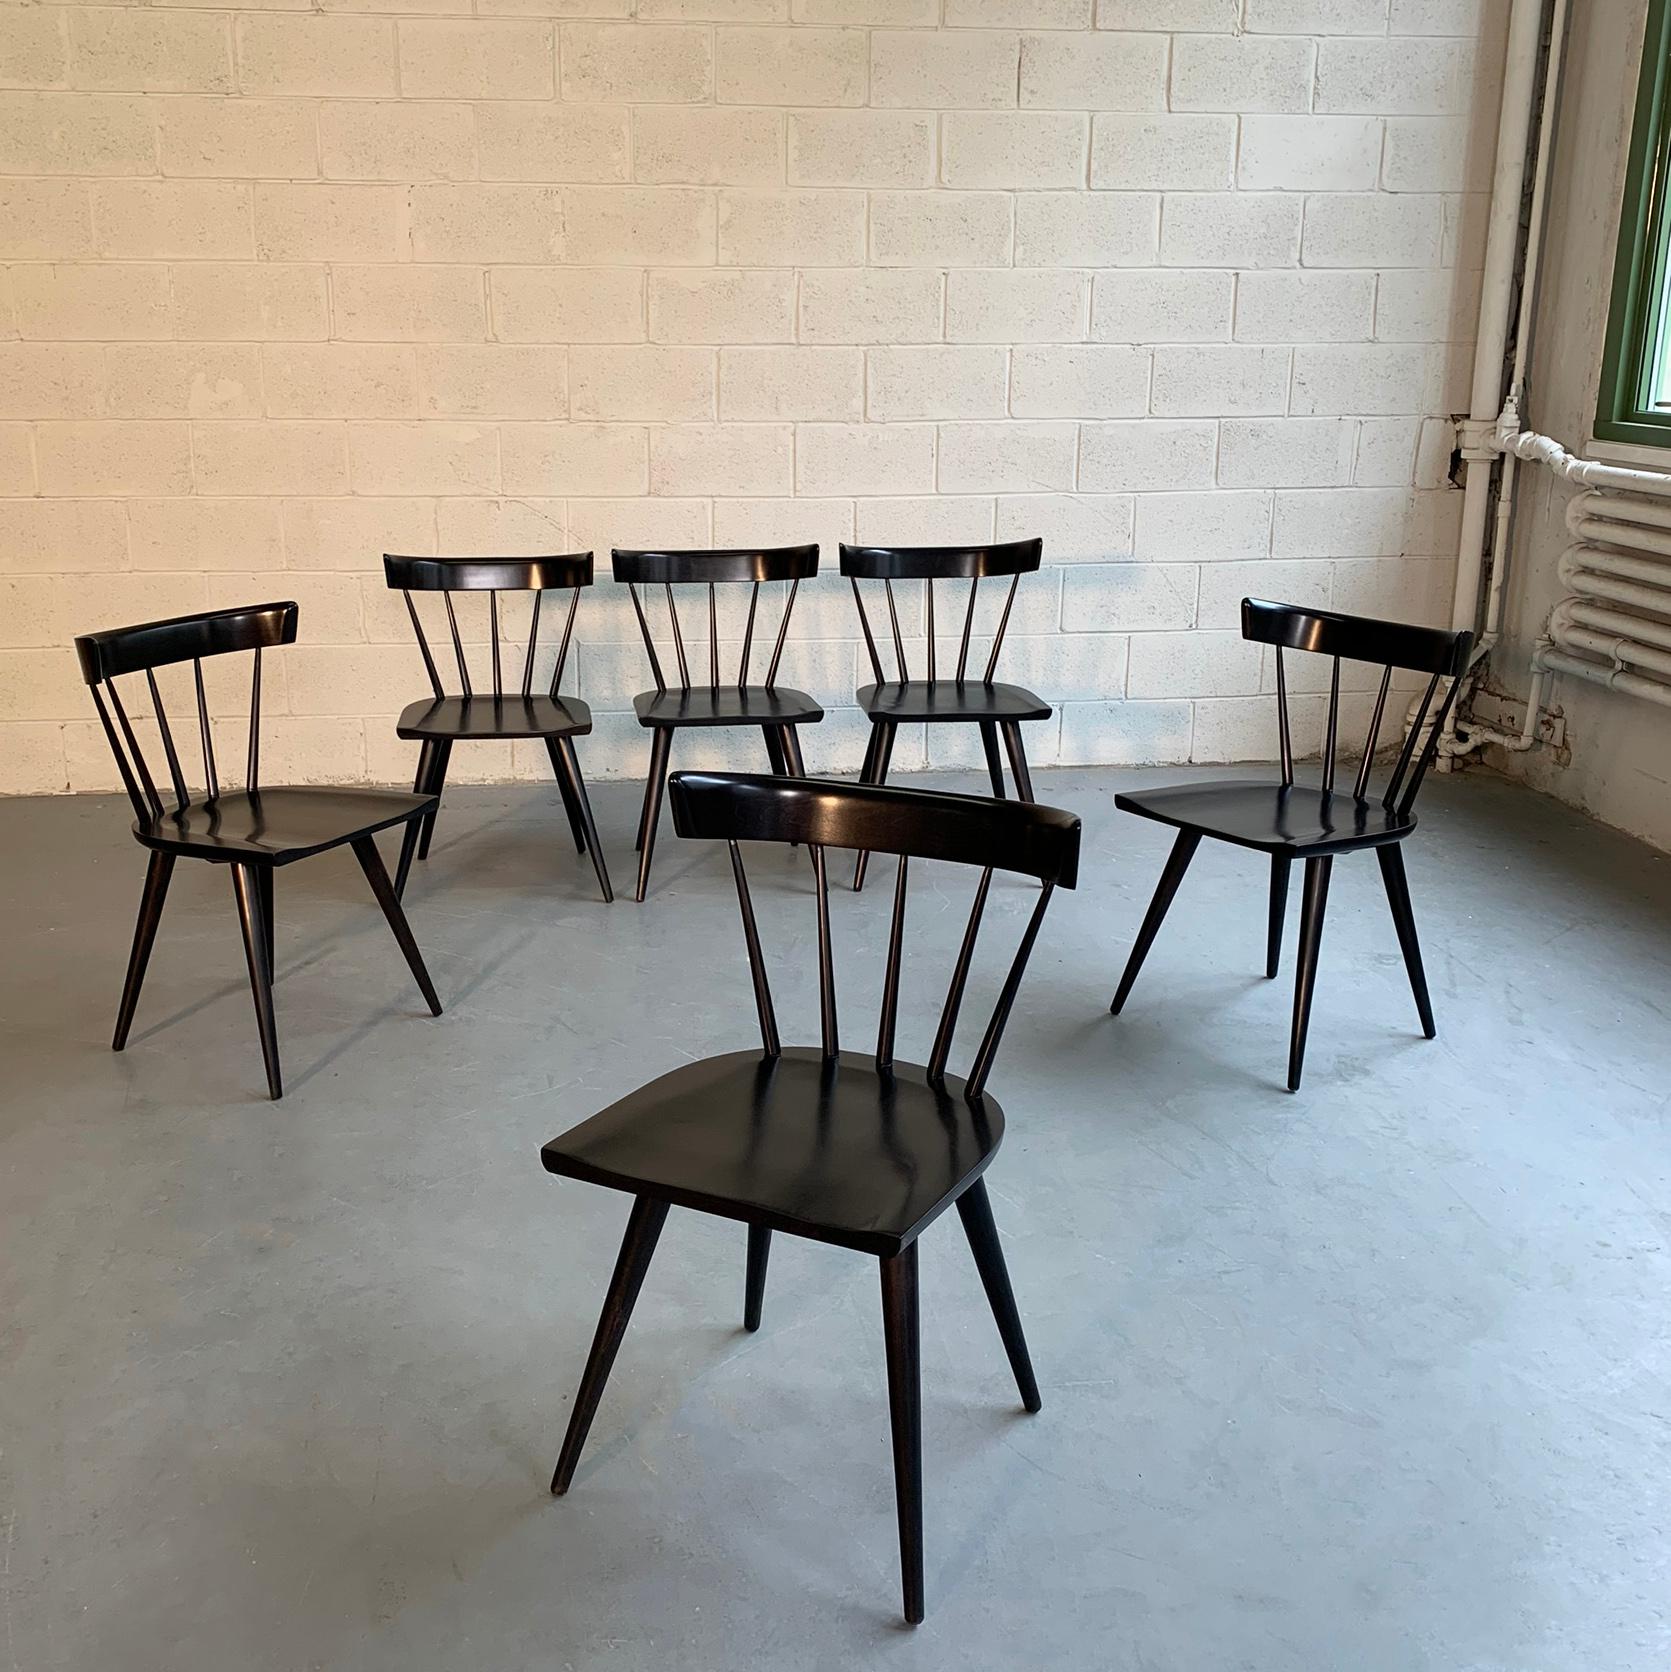 Set of 6, Mid-Century Modern, Windsor style, spindle back, solid maple chairs by Paul McCobb for Planner Group, Winchendon in an ebonized finish - the darkest stain allowing some wood grain to show through.